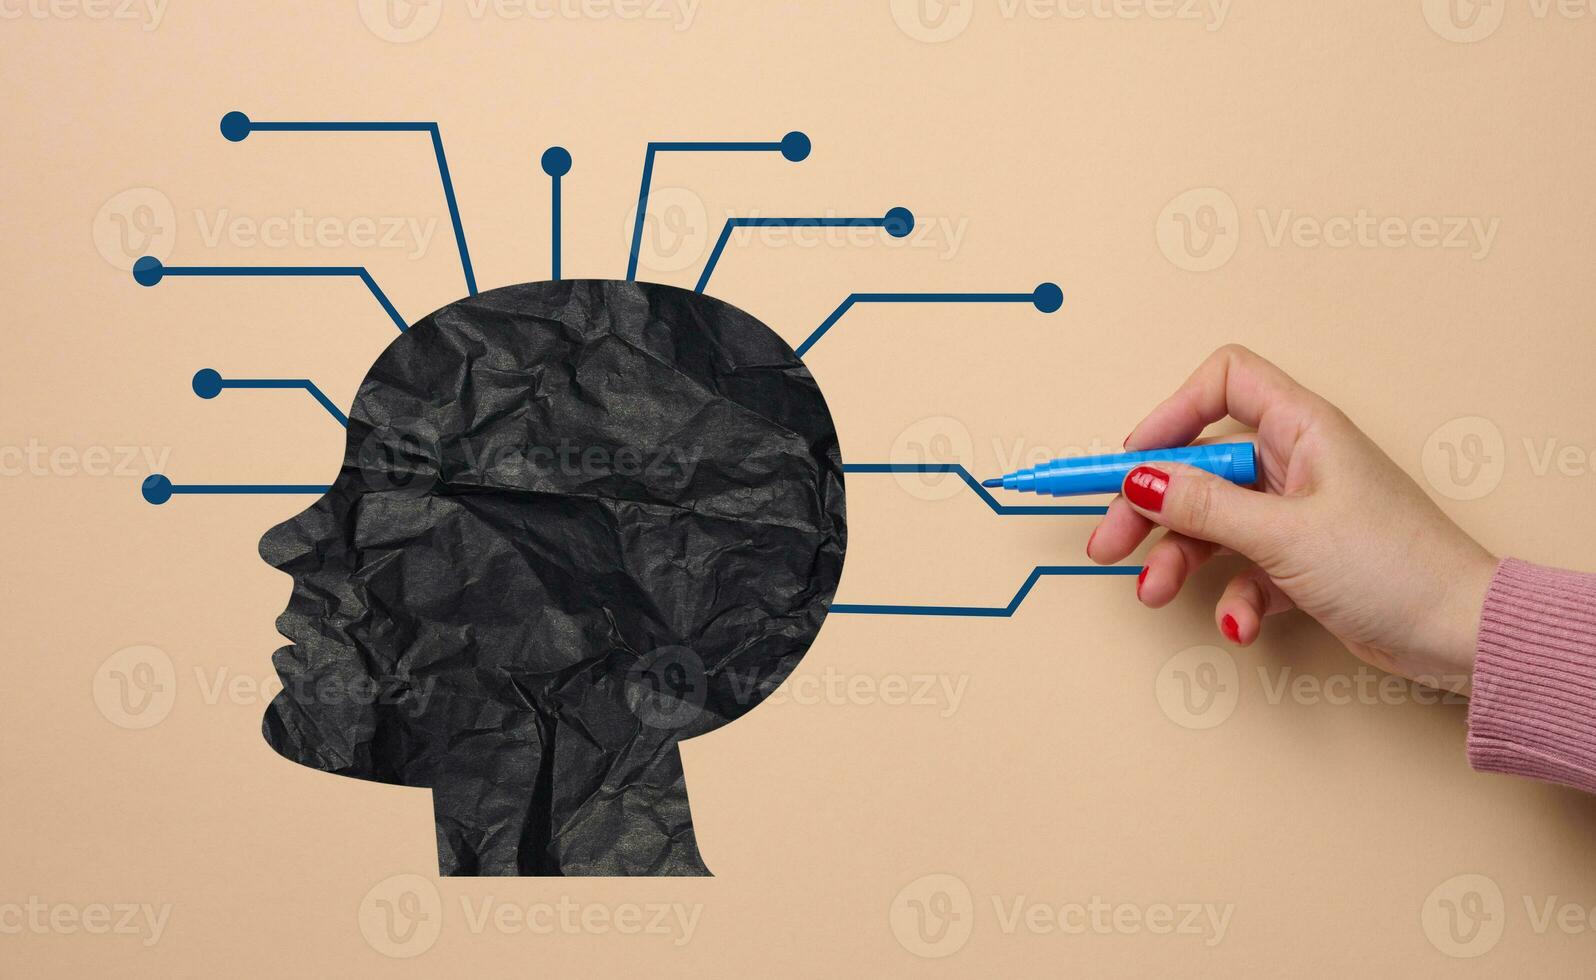 The silhouette of a head and a hand with a marker, representing the concept of artificial intelligence learning photo